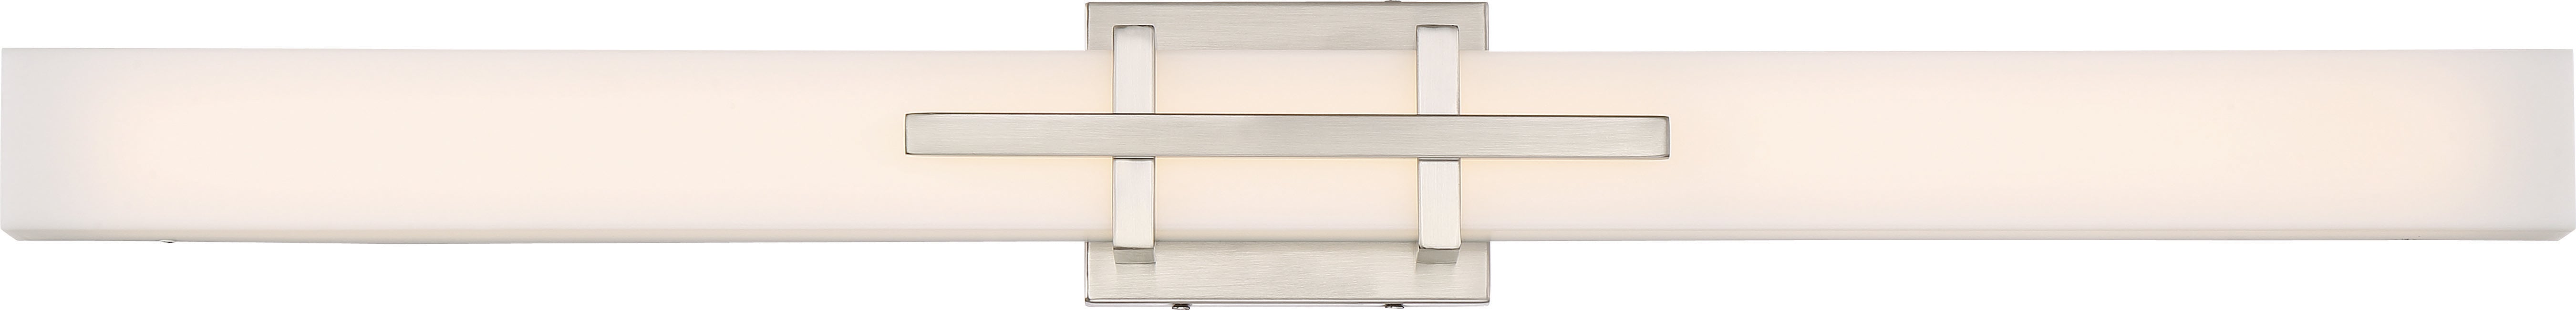 SATCO/NUVO Grill Triple LED Wall Sconce Polished Nickel Finish White Acrylic Lens (62-875)